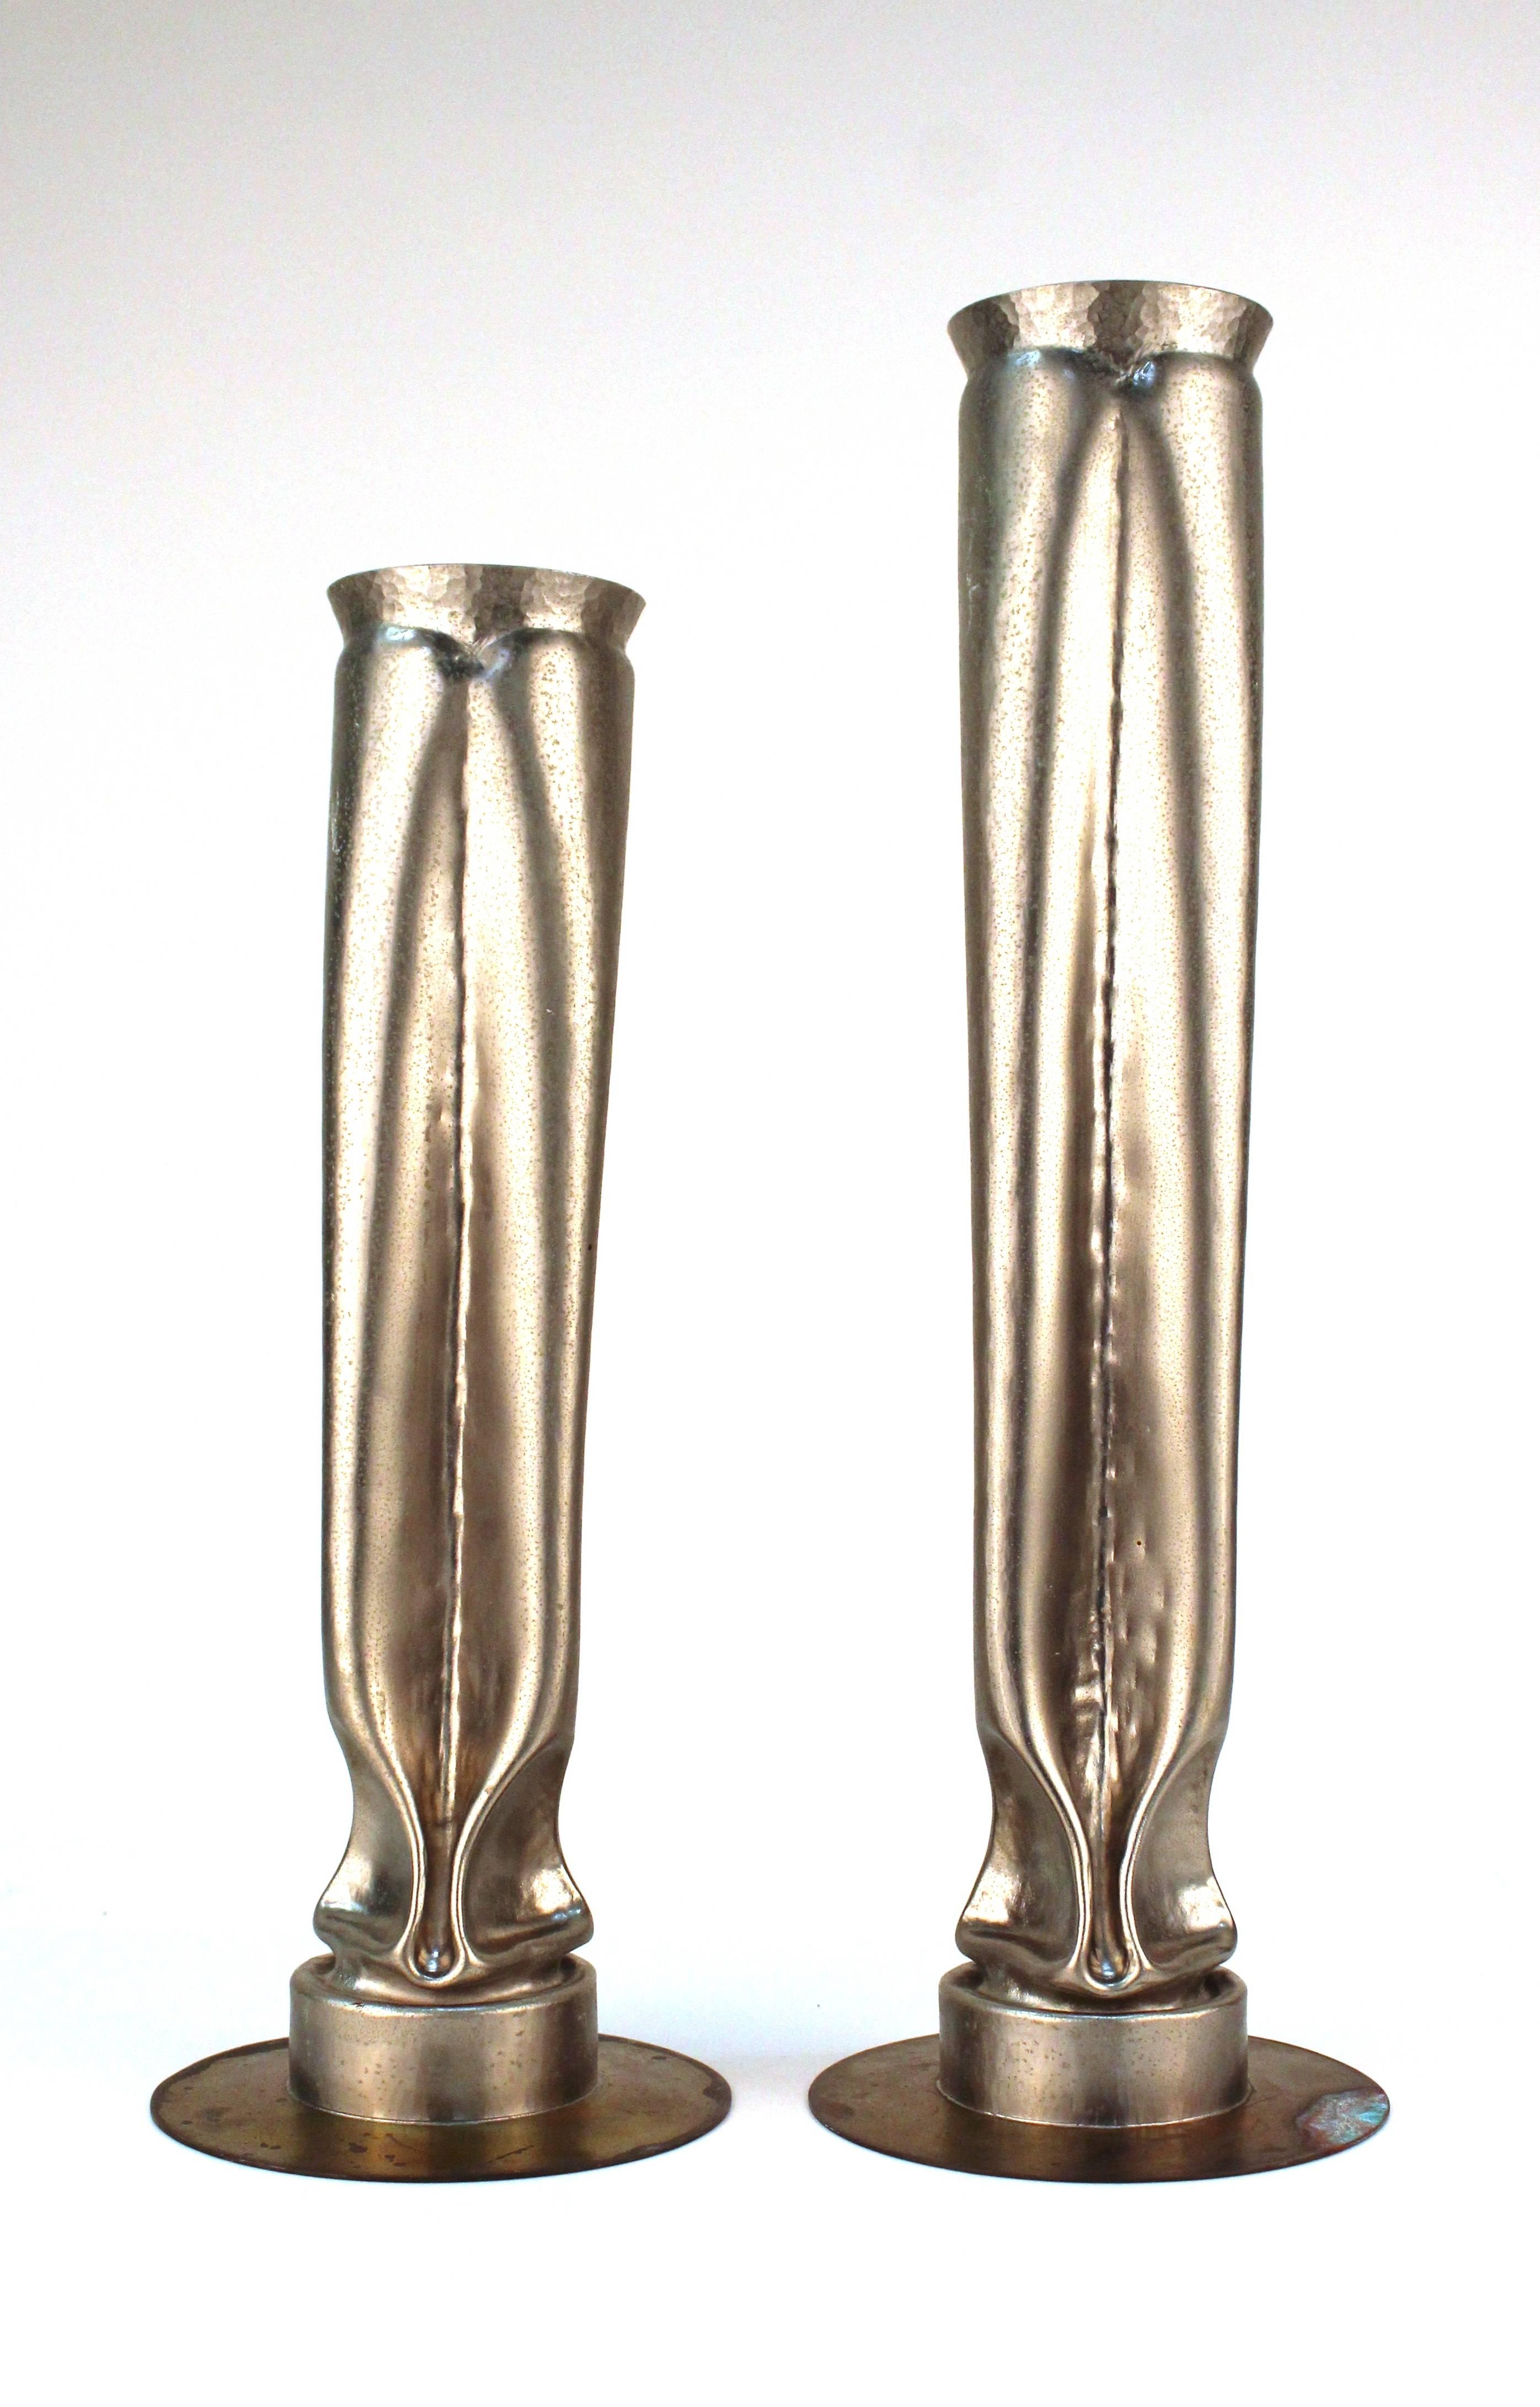 Pair of Brutalist manner vases of unmatched heights designed by Thomas Roy Markusen, produced circa 1980s, each crafted of metal with nickel plate finish, flared rim body stylistically warped and folded, on circular flat bases. Markings include